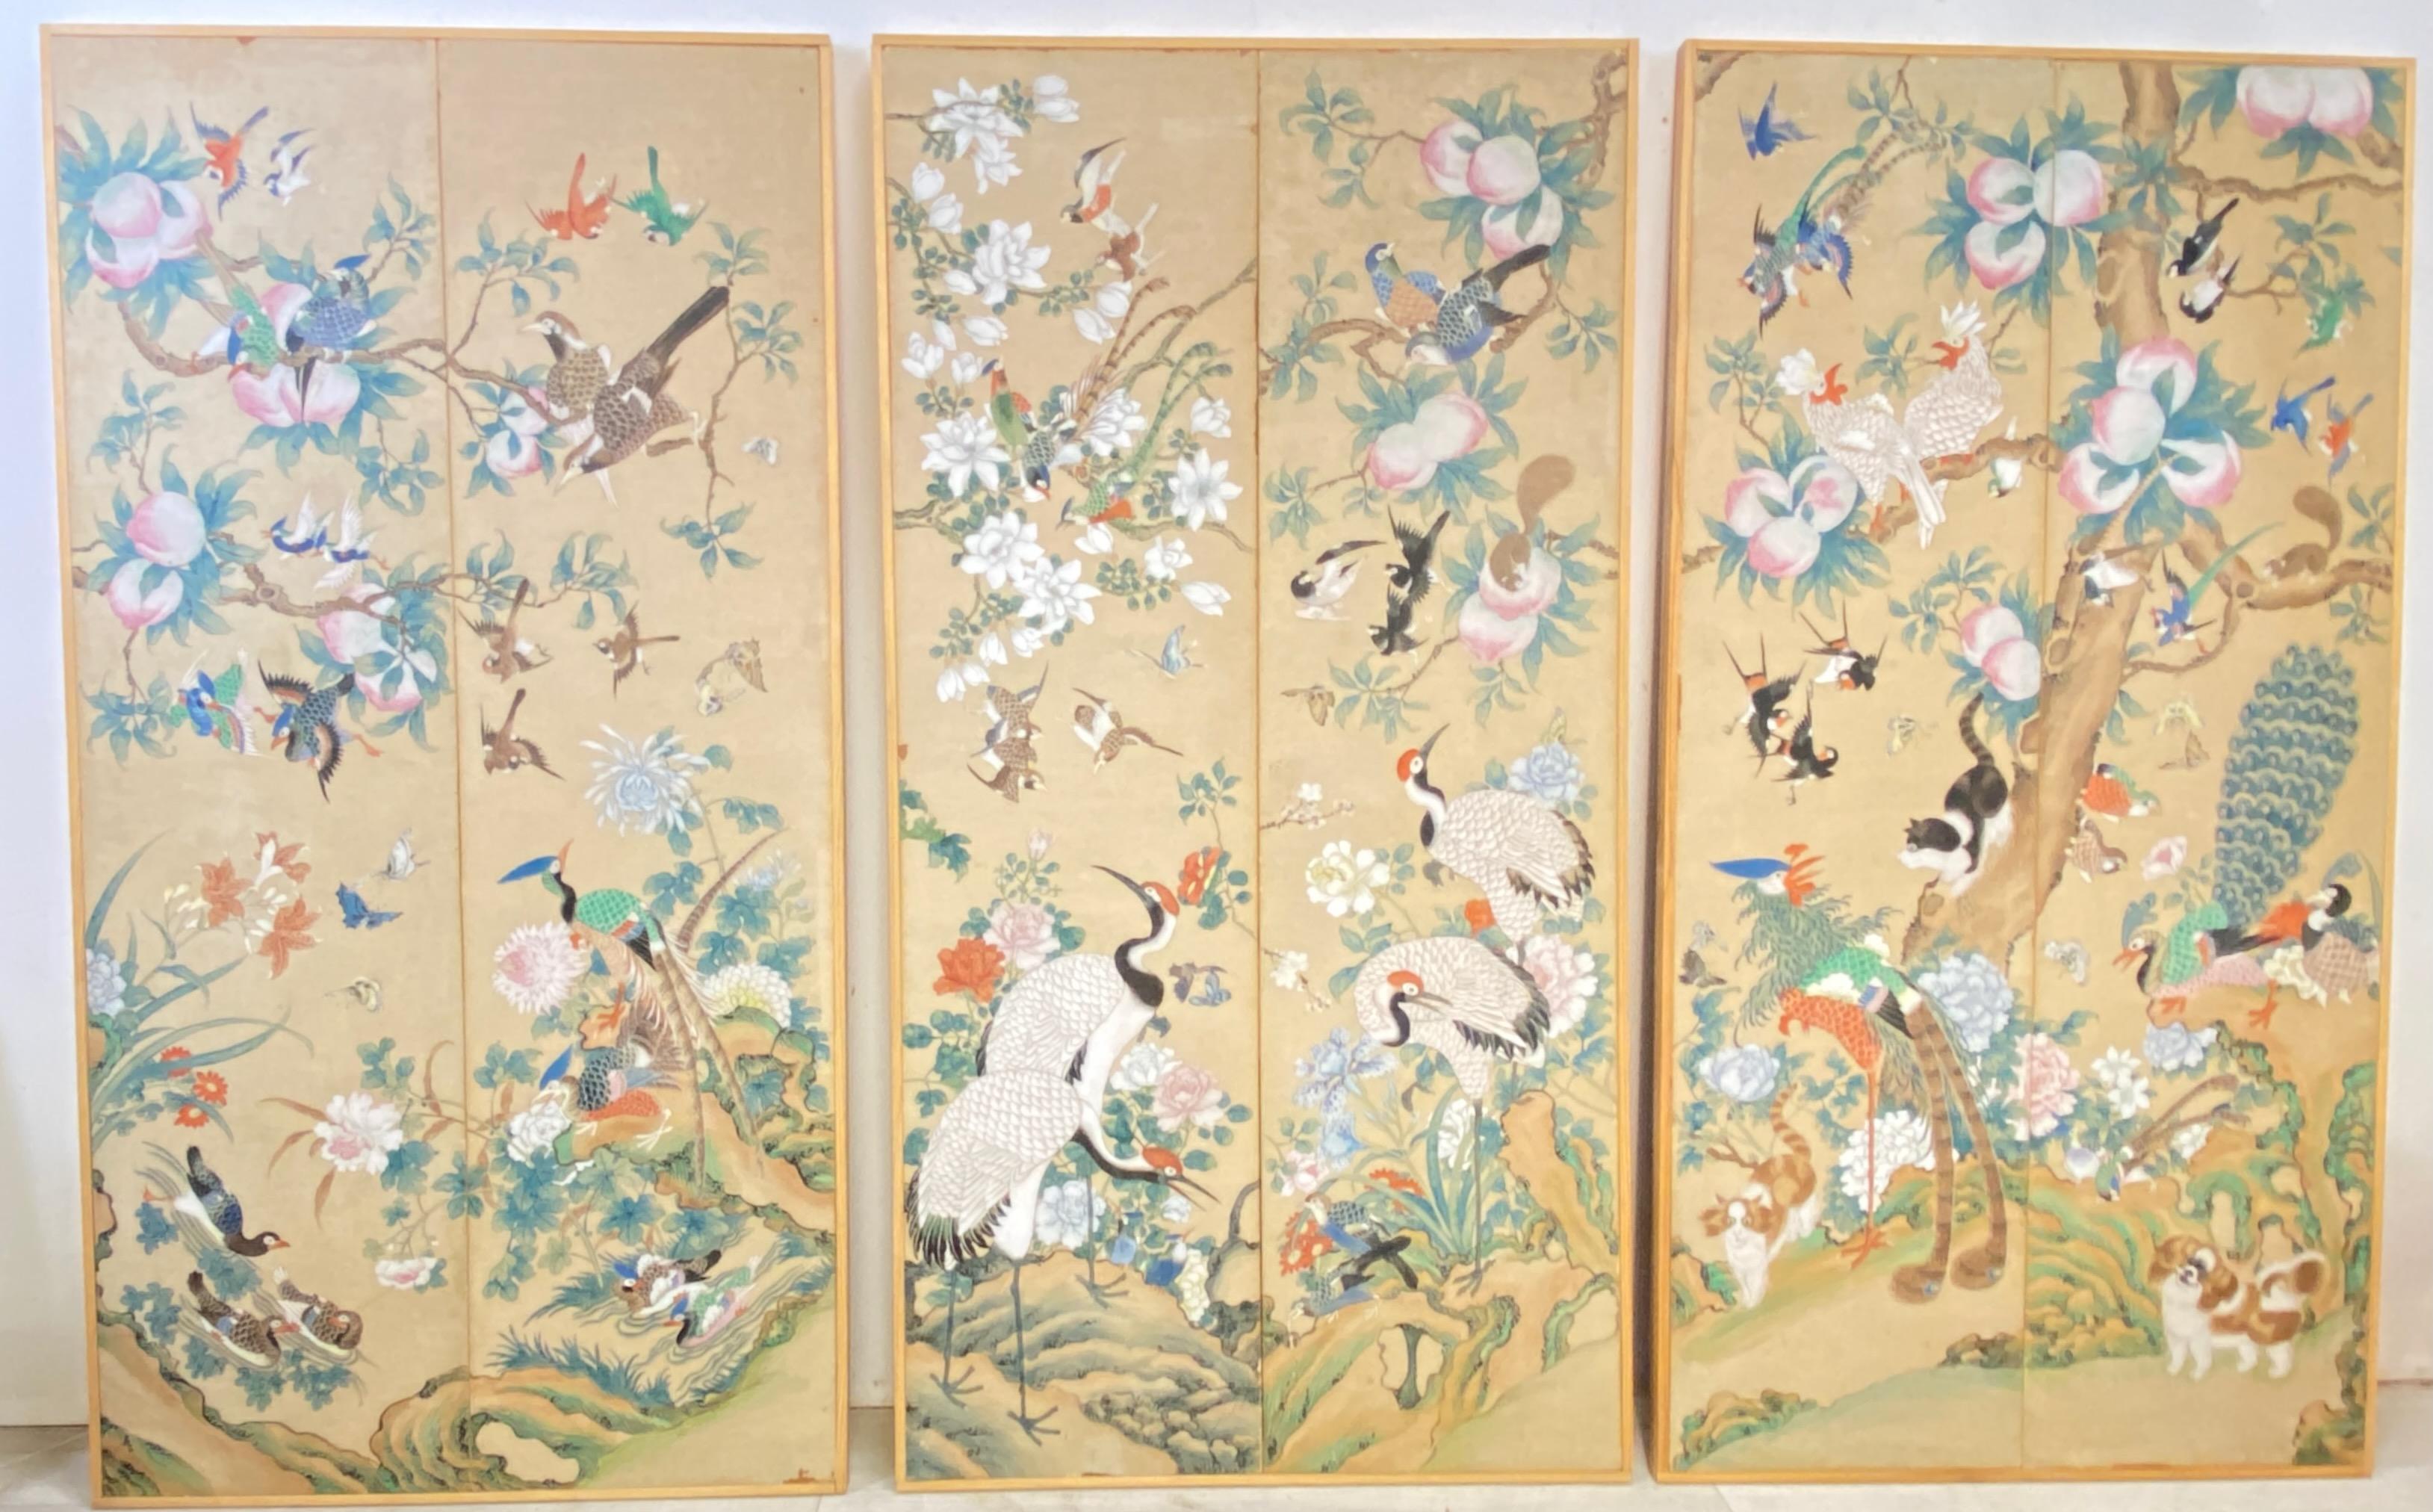 A set of three mounted hand painted wallpaper panels in simple wood frames.
Beautifully and elaborate painted scenes with birds, flowers, butterflies, cats, dogs, squirrels, fruit and foliage. 
Most likely this was originally part of a much larger